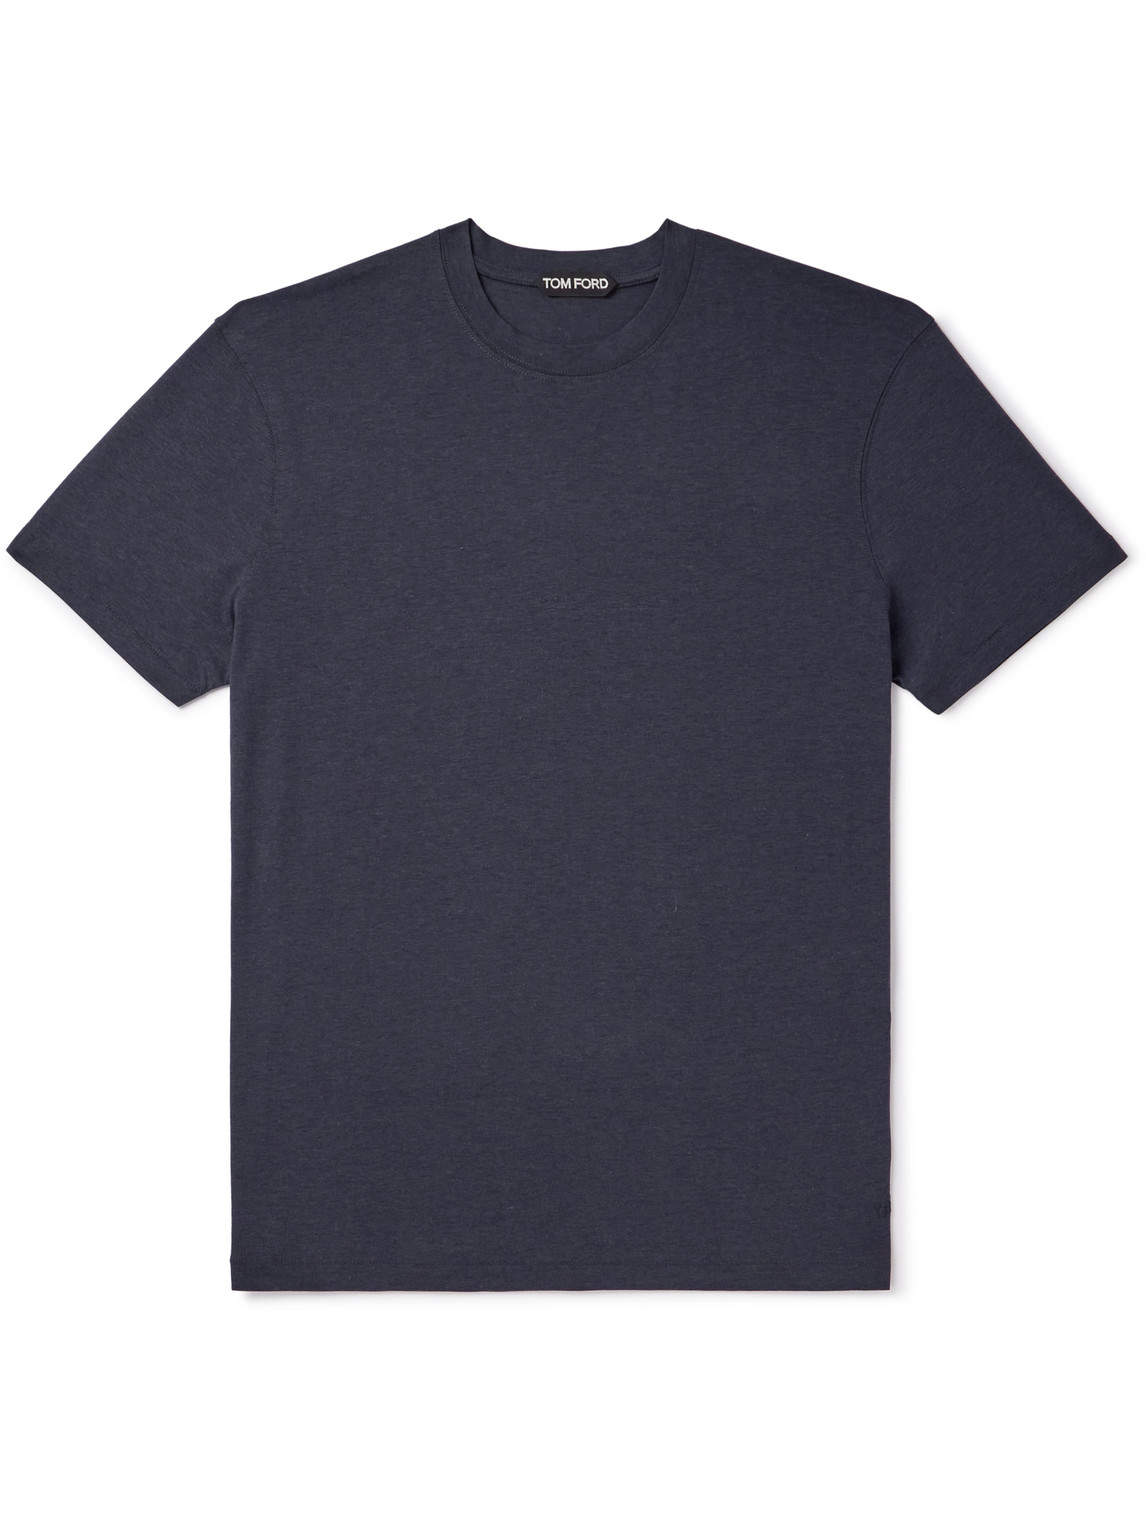 TOM FORD - Lyocell and Cotton-Blend Jersey T-Shirt - Men - Blue - IT 48 von TOM FORD